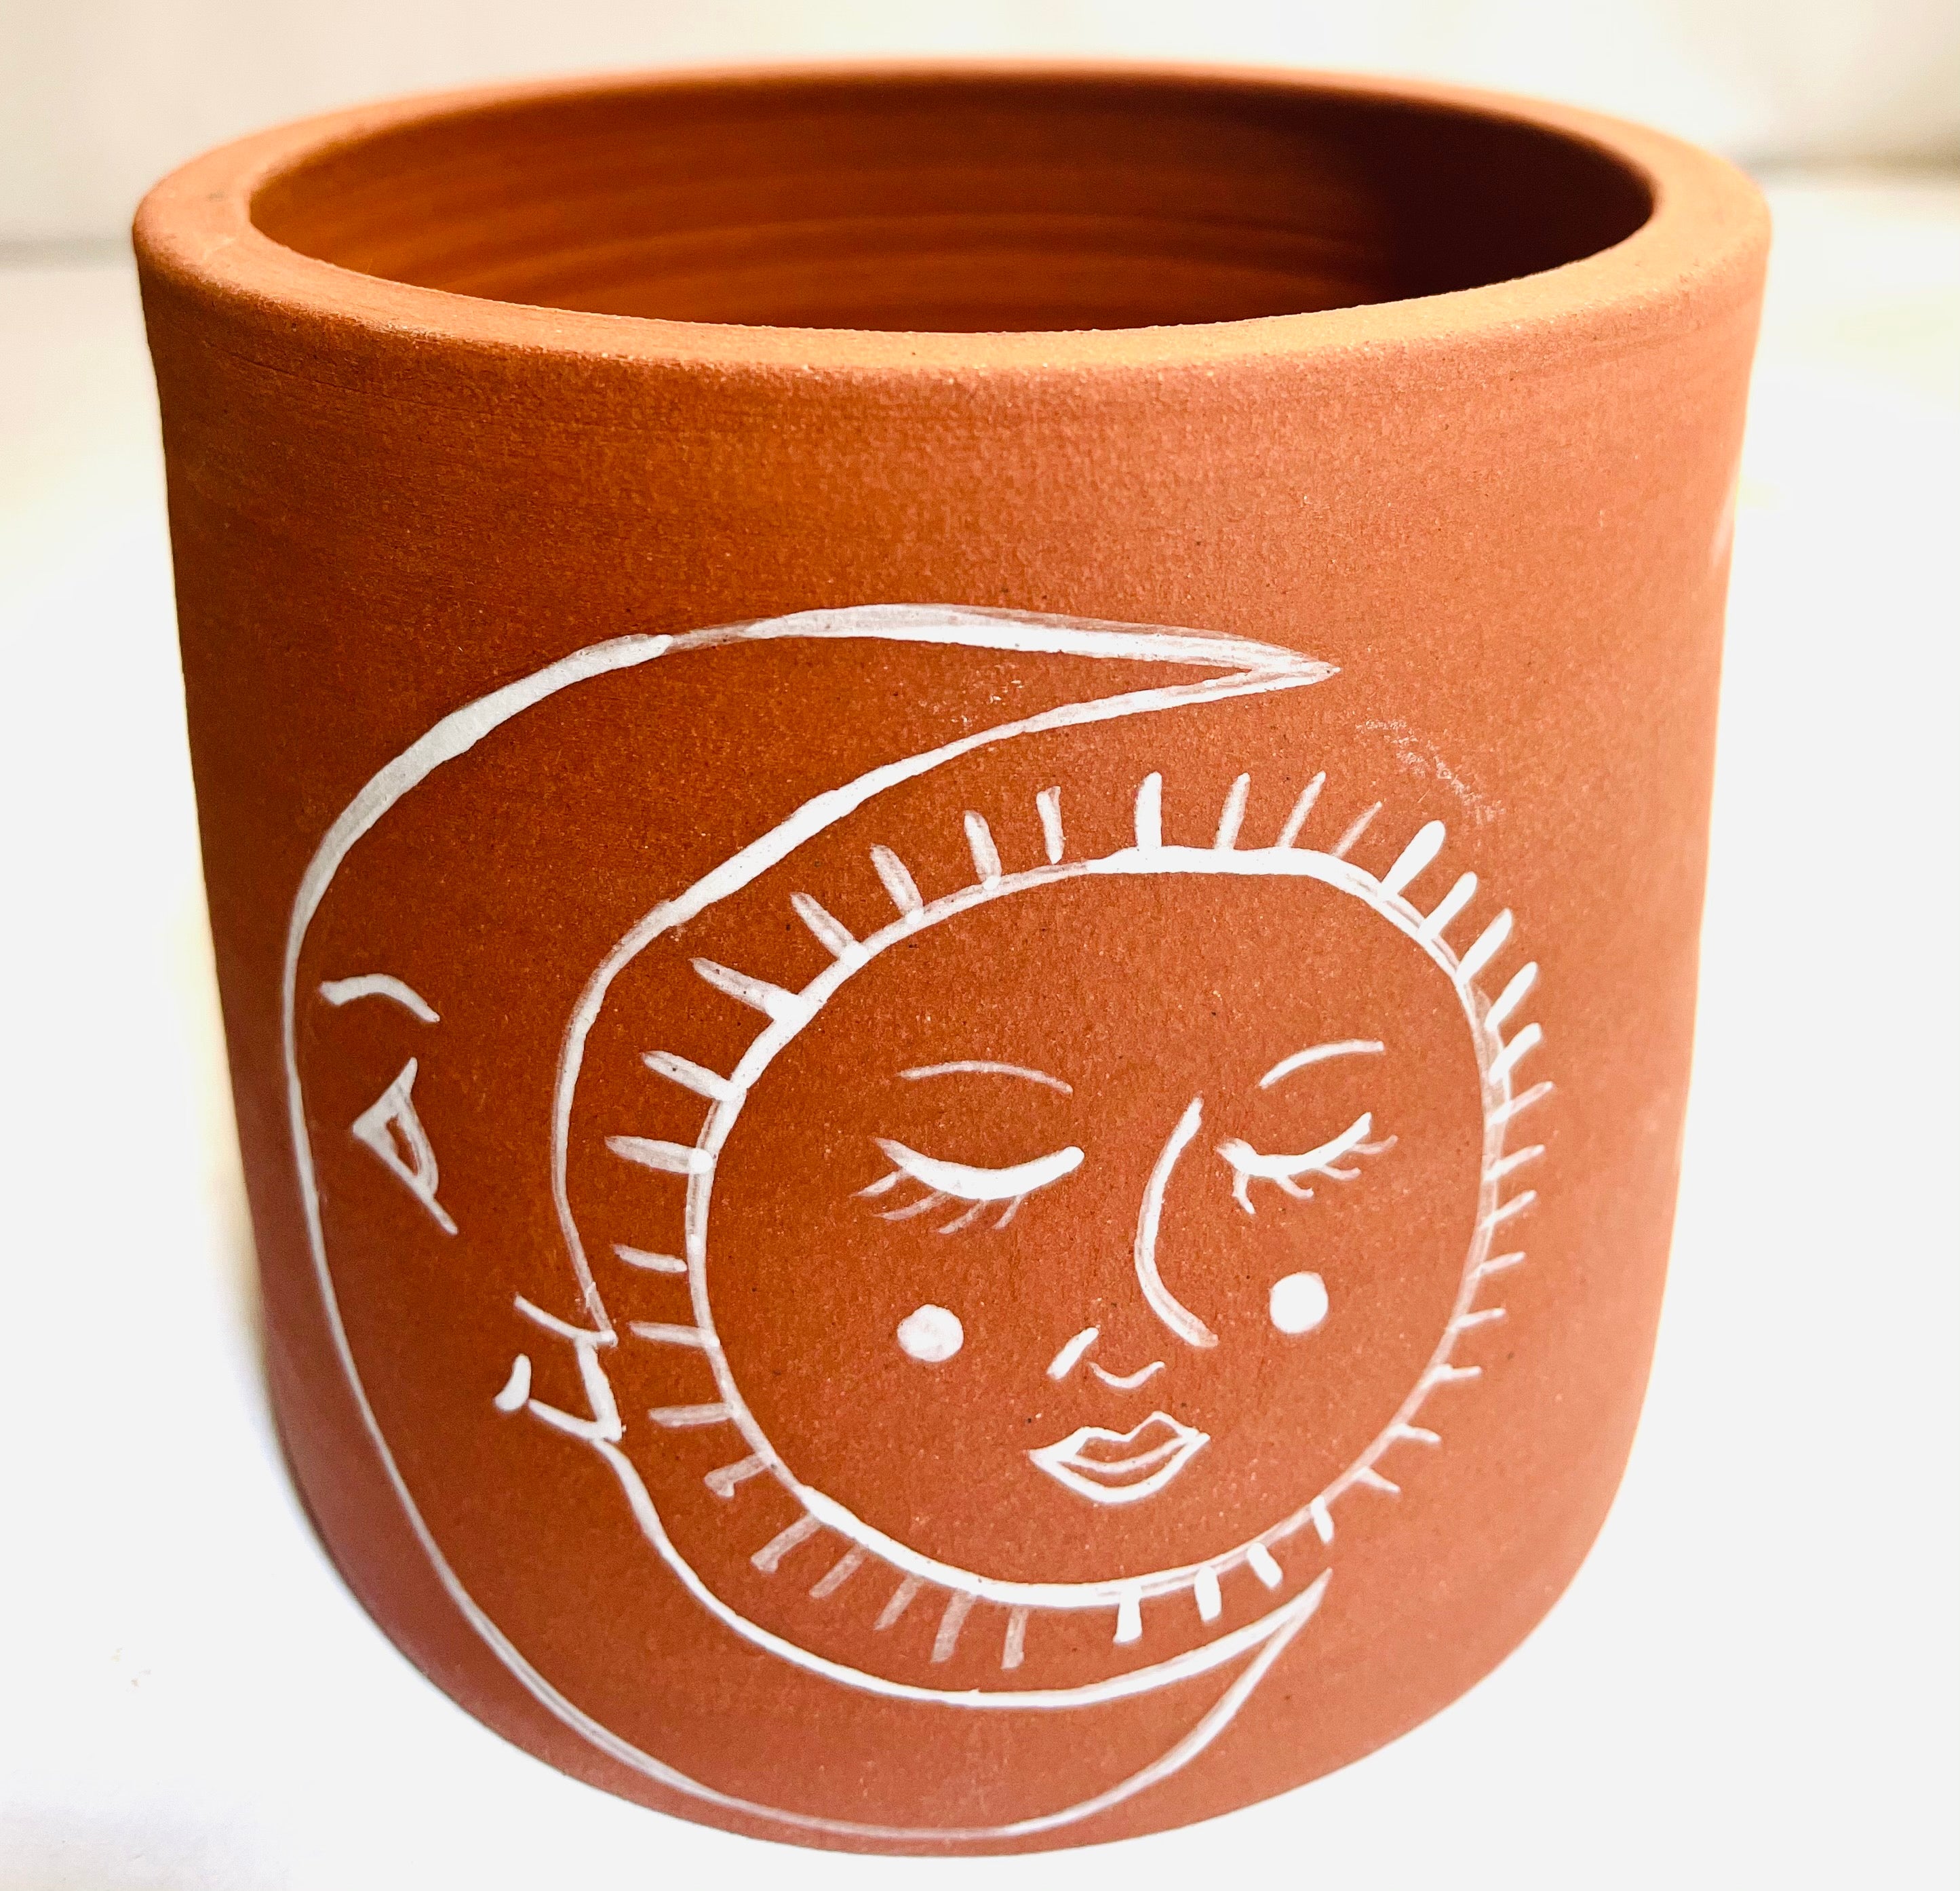 Luna y Sol Planter: an unglazed red clay cylindrical planter with a white handpainted design of a large crescent moon, with a serenely smiling sun in the space between the crescent's points.